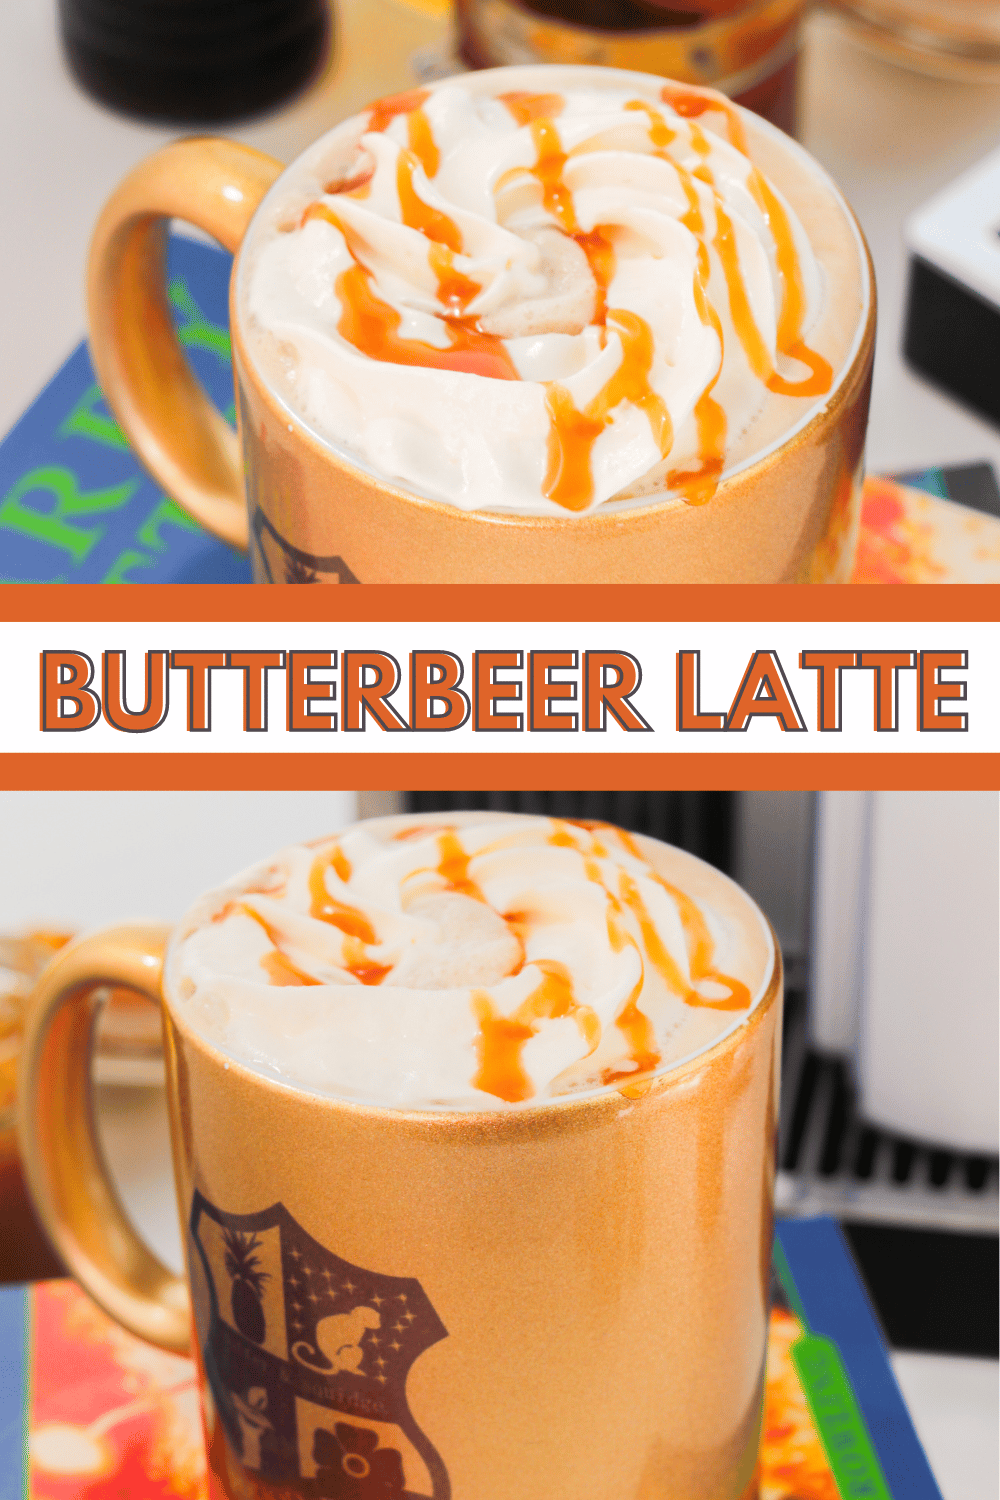 This Butterbeer Latte is the perfect winter treat, it’s creamy, light and a great way to warm up on a chilly day. #butterbeerlatte #butterbeer #latte #starbucks via @wondermomwannab